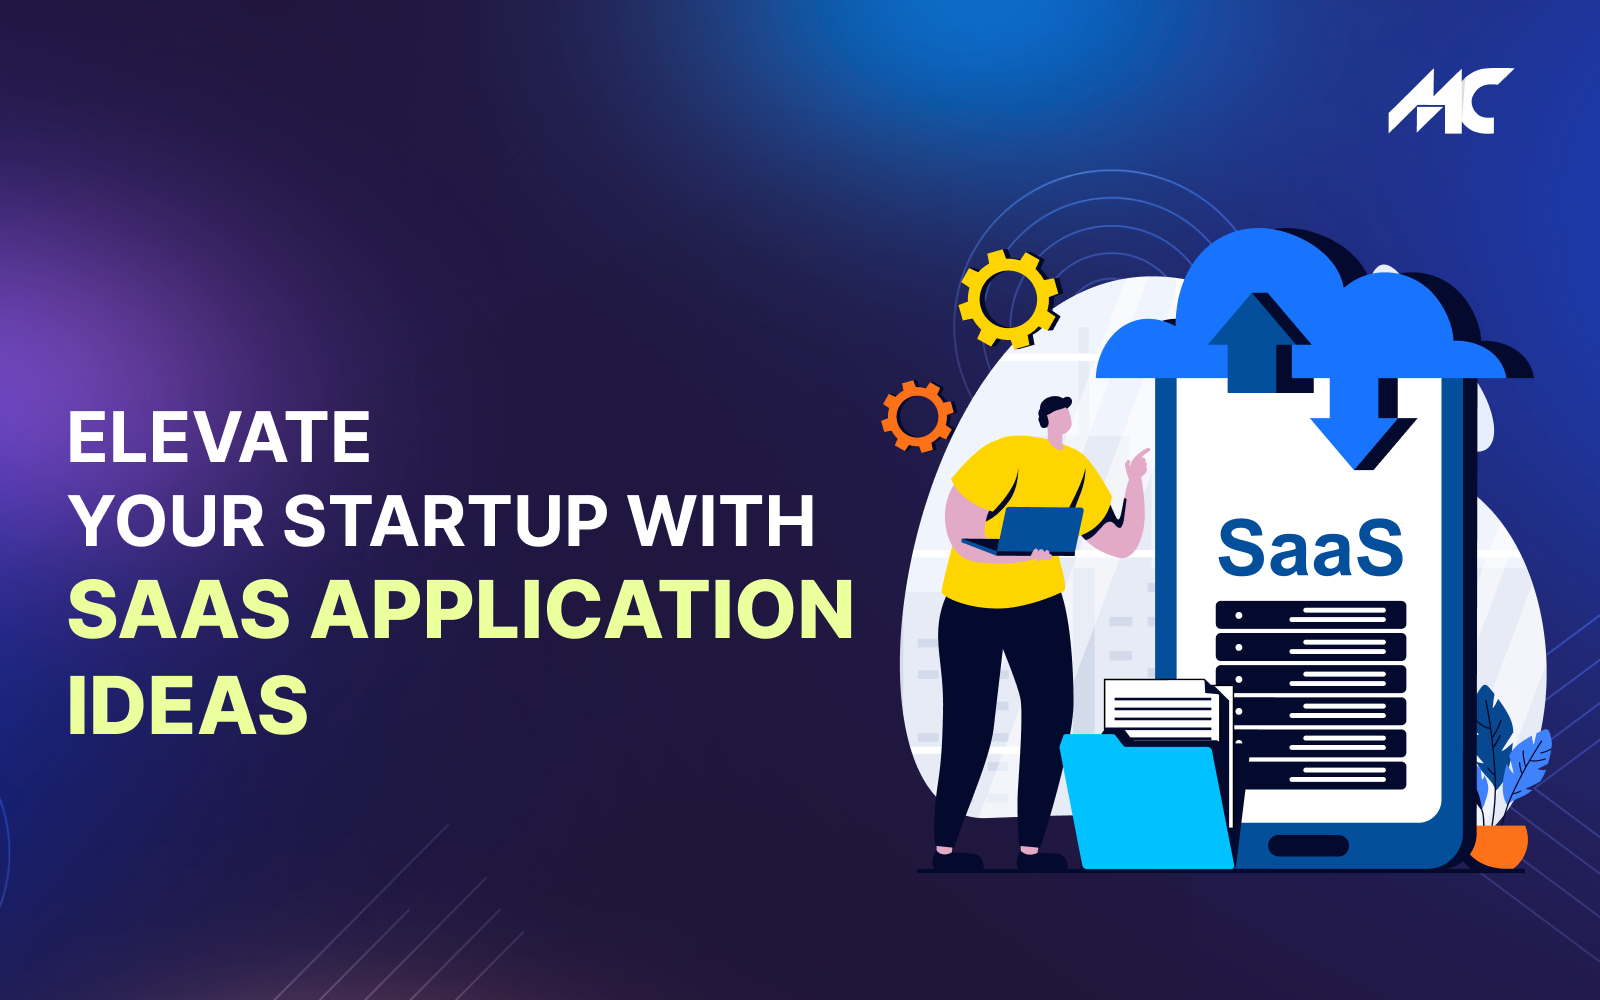 Elevate Your Startup With SaaS Application Ideas